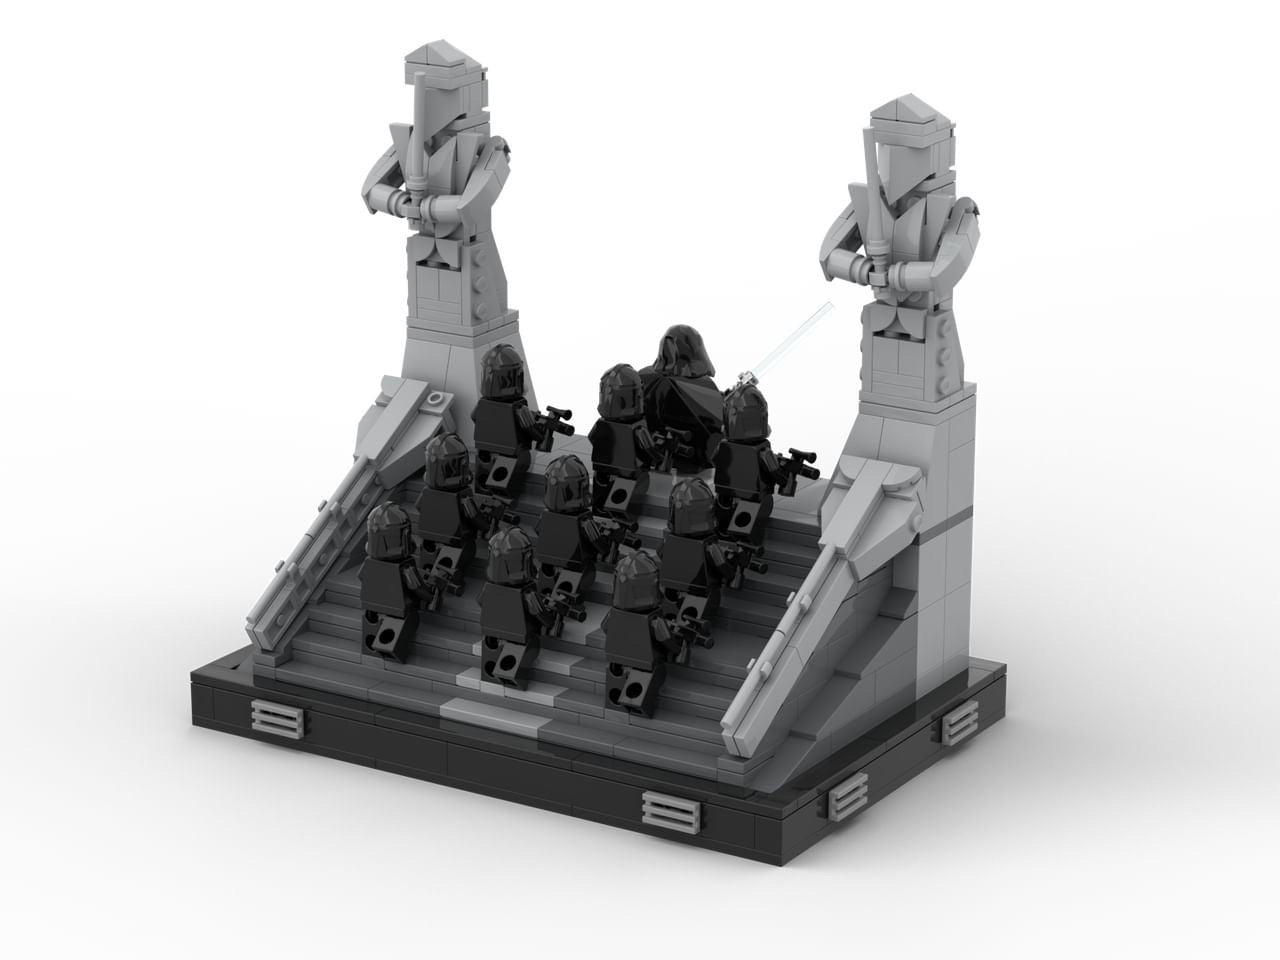 ORDER 66 - MARCH ON THE TEMPLE MOC